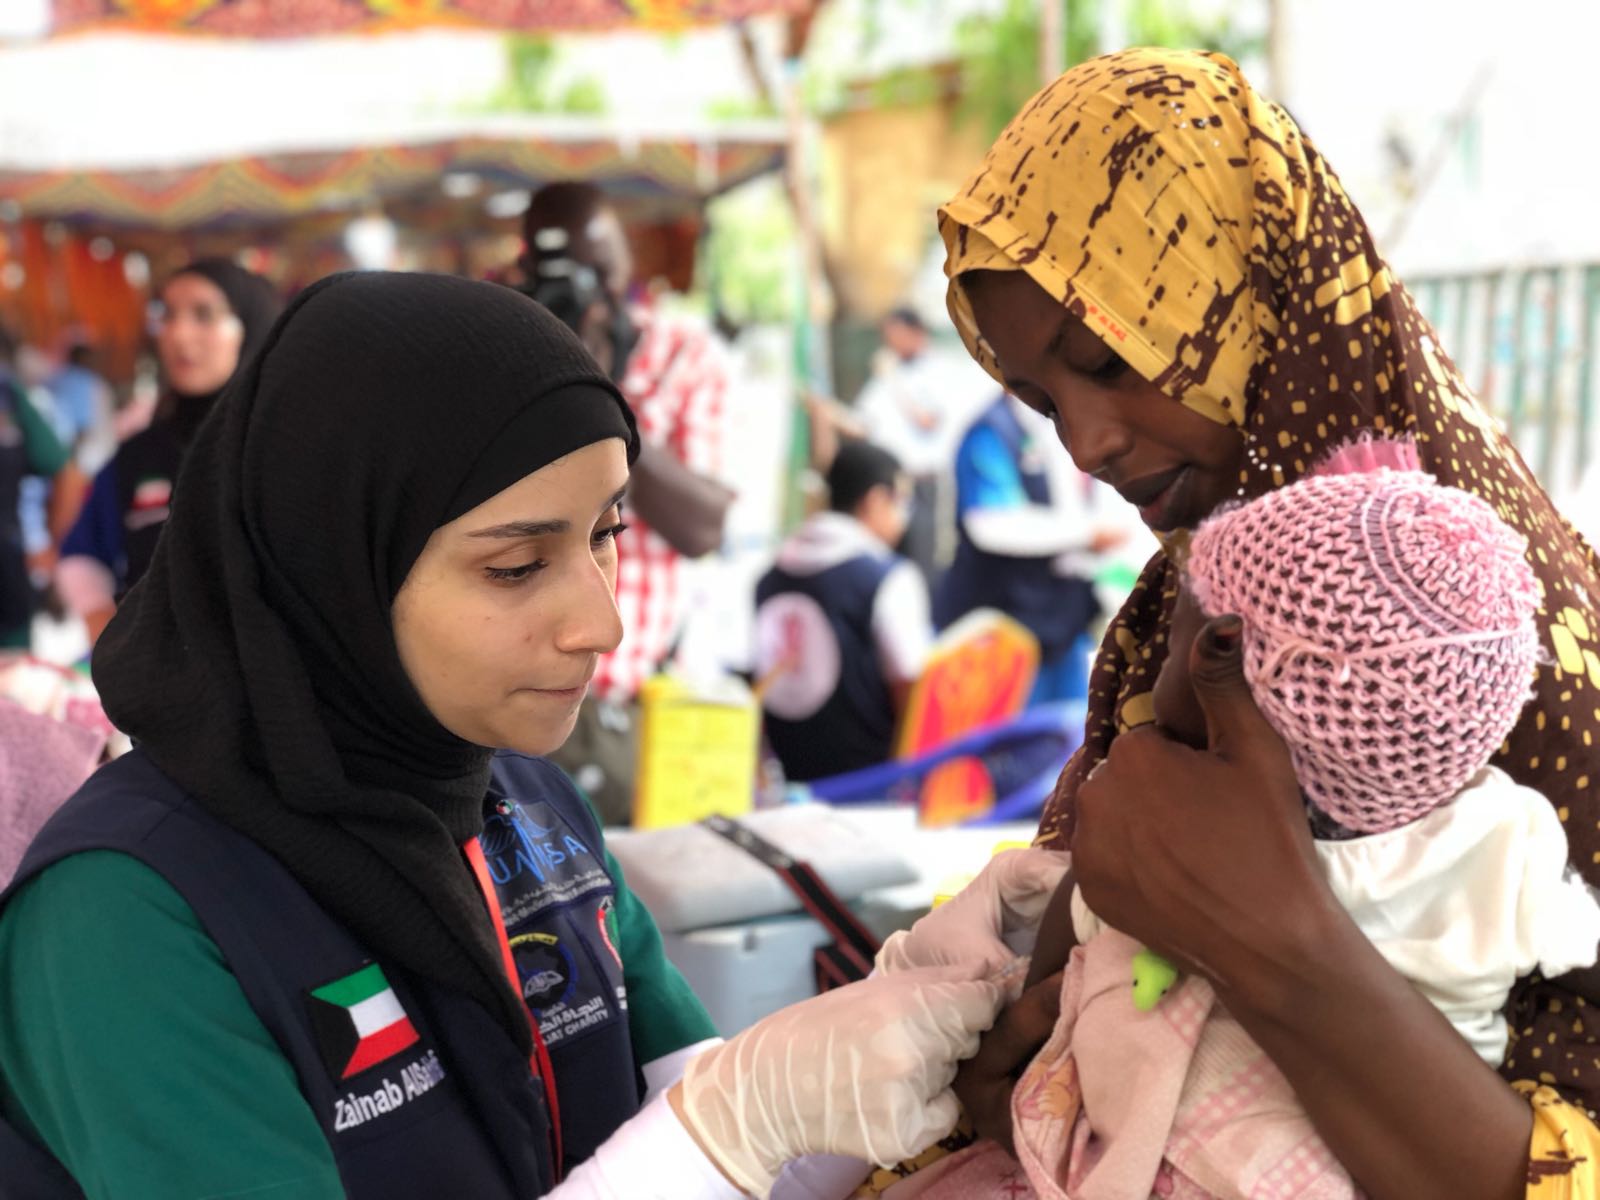 Kuwait Relief Society, along with the Faculty of Medicine Students at Kuwait University and Al-najat Charity launches treatment program In Chad